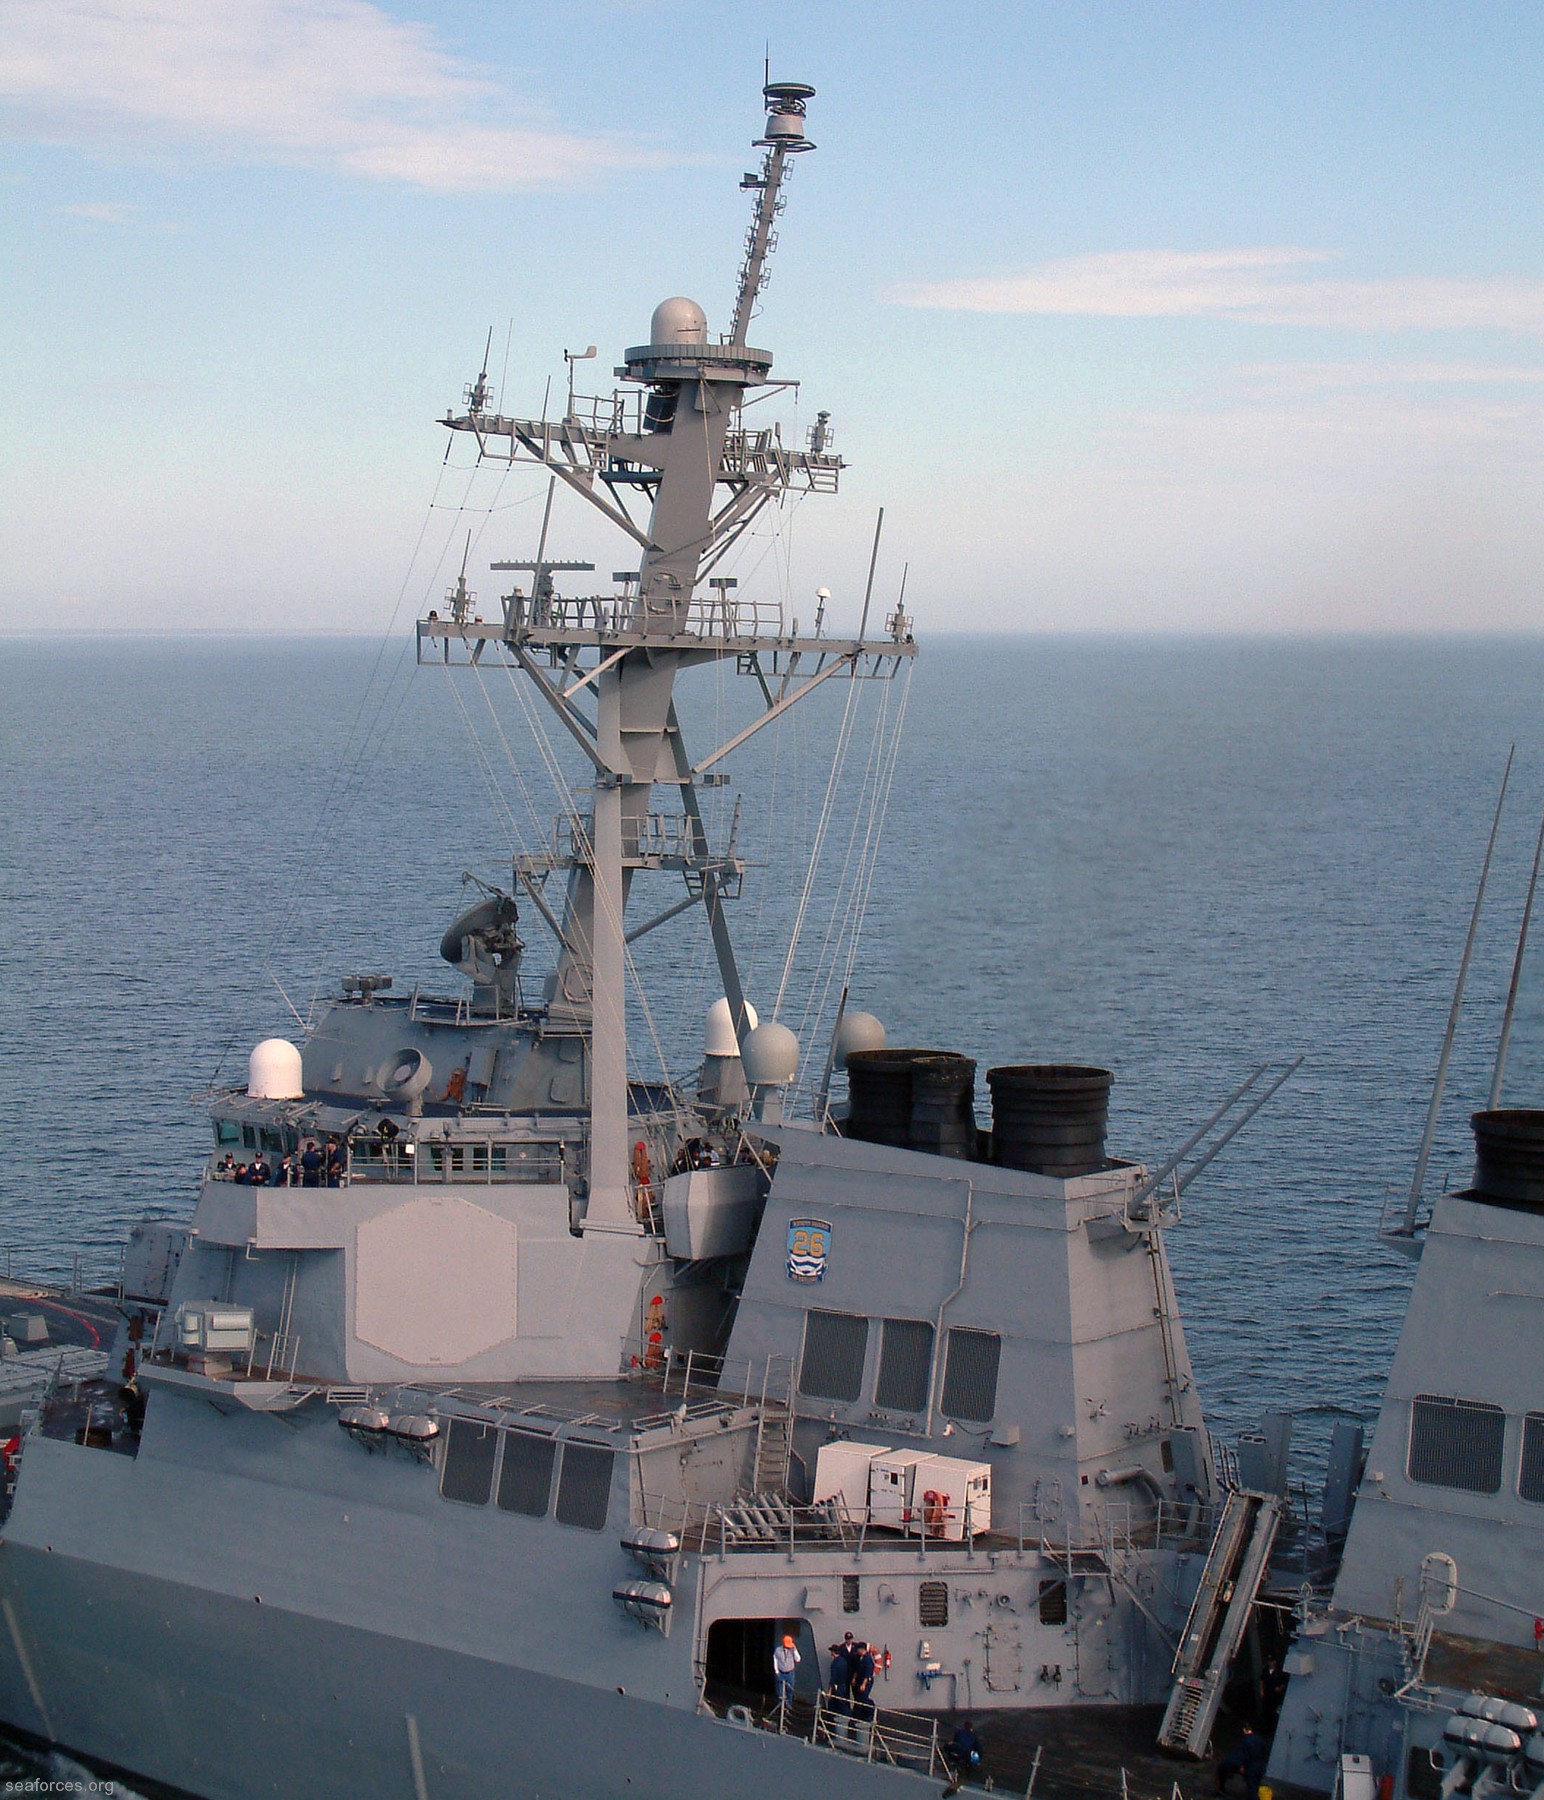 ddg-52 uss barry guided missile destroyer us navy 95 arleigh burke class